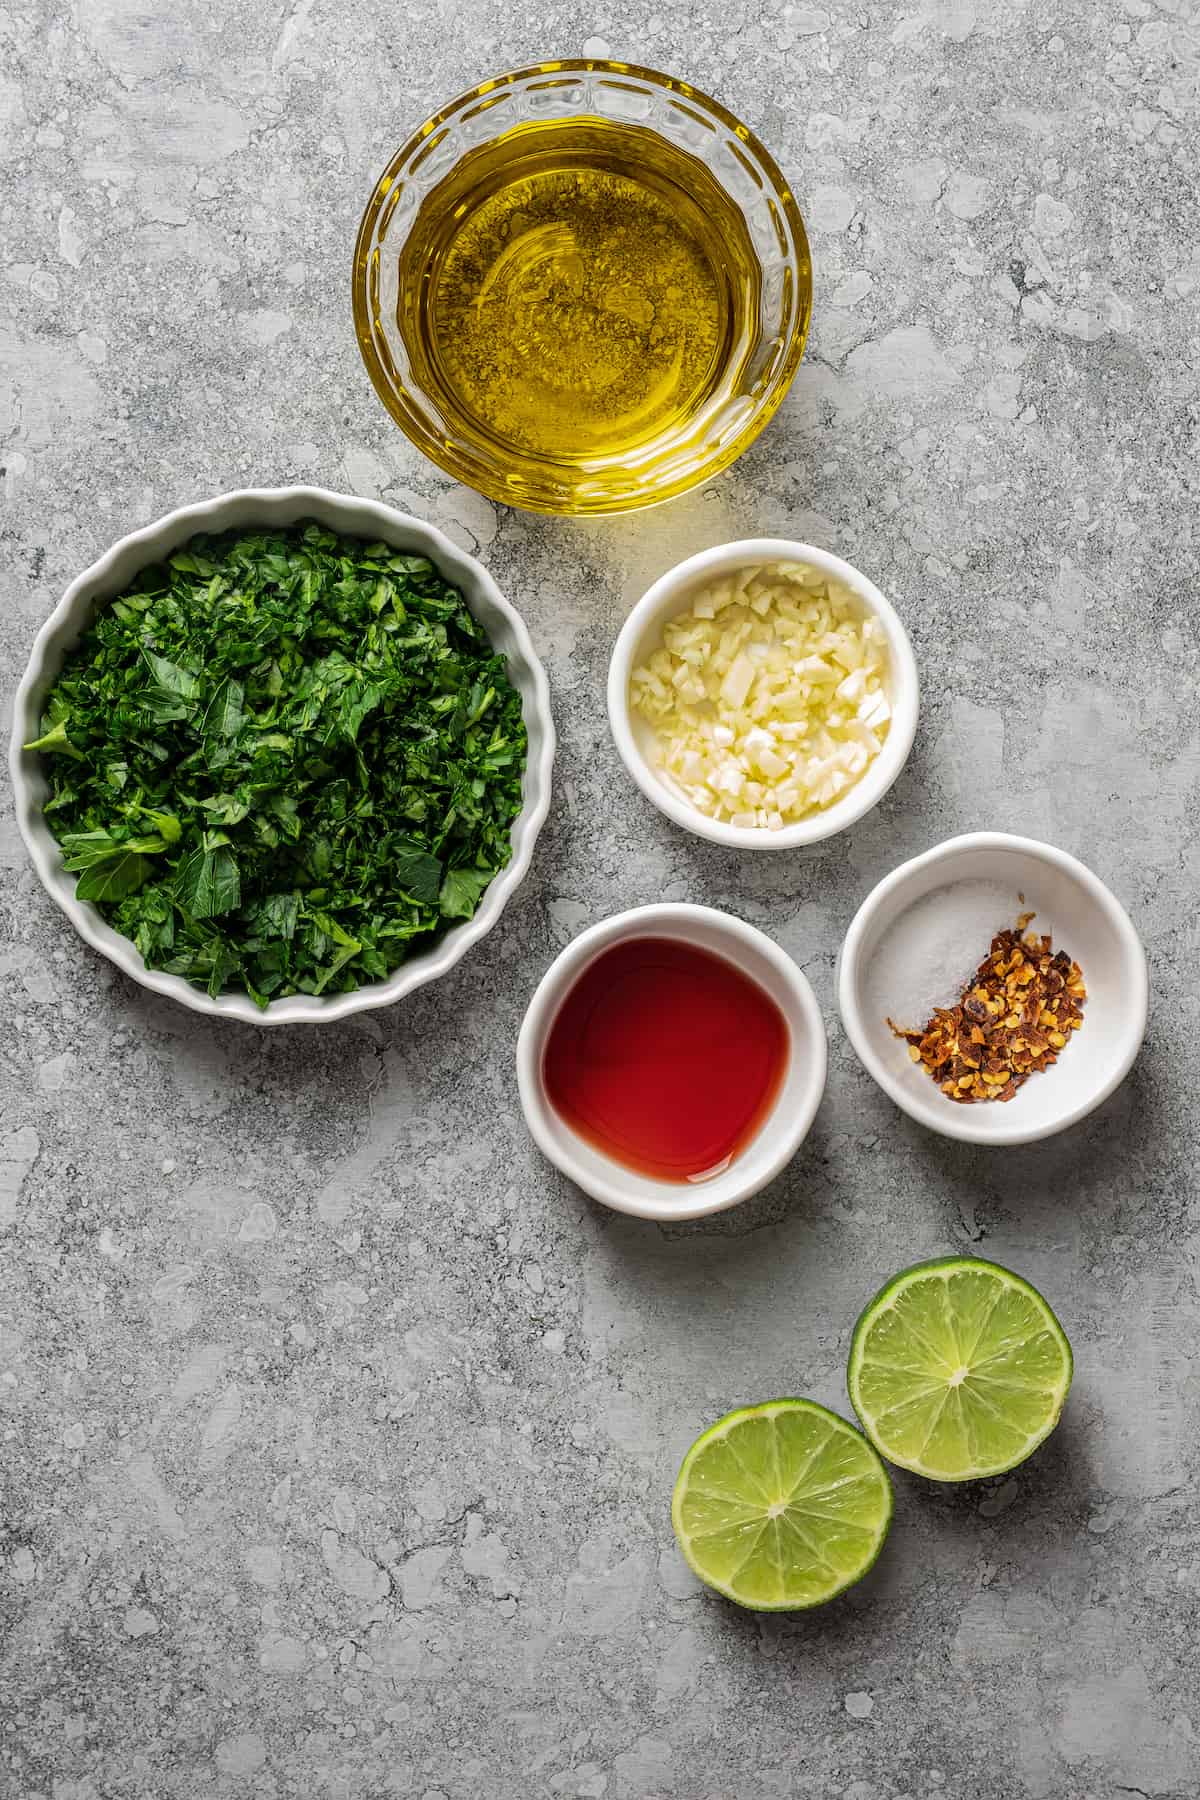 Ingredients for chimichurri separated into bowls.